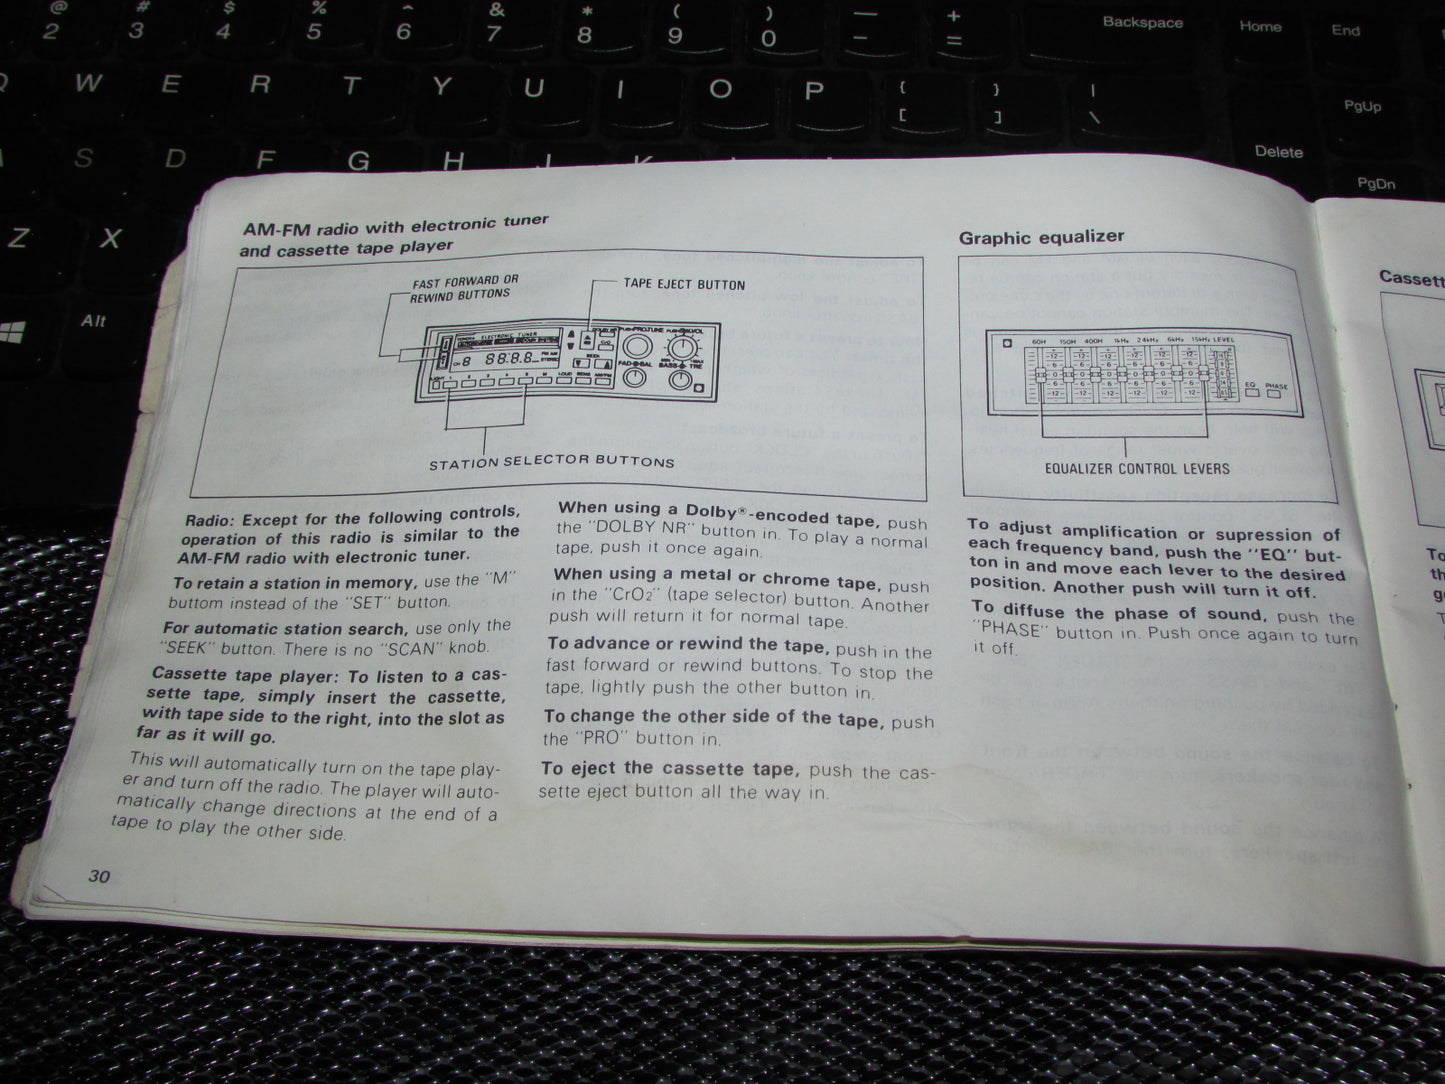 Toyota Celica (1982) Owners Manual